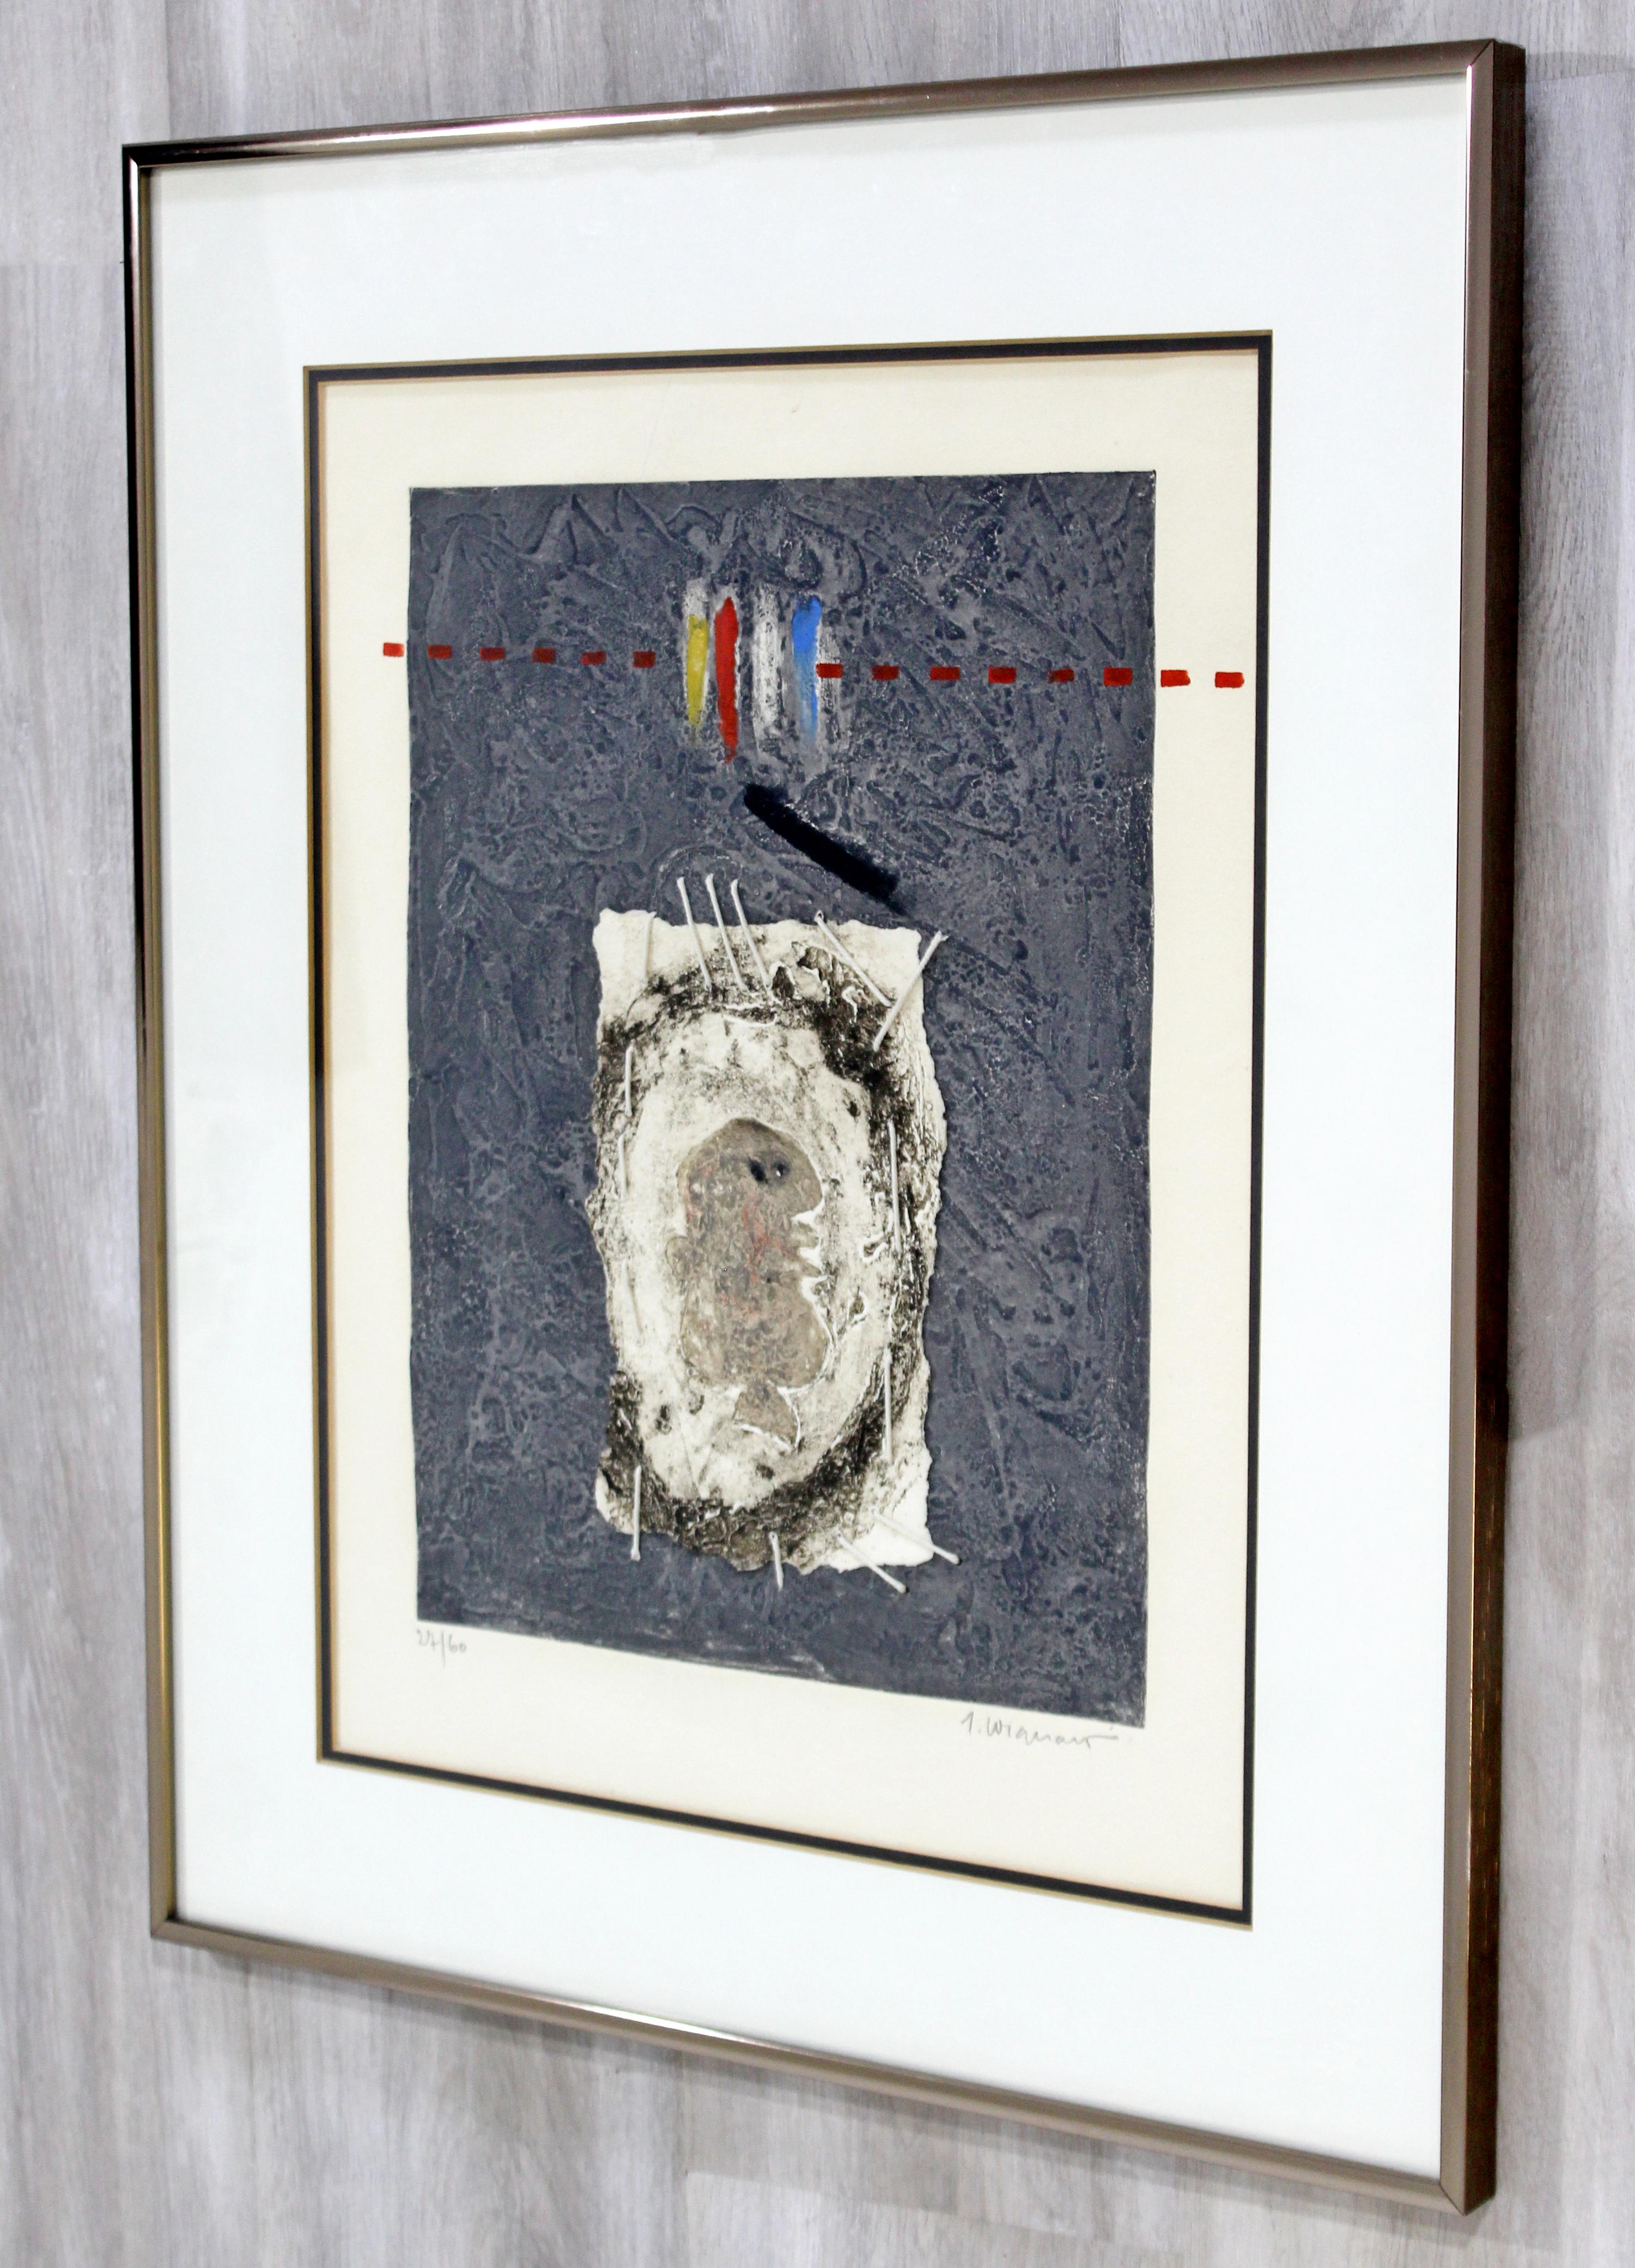 Late 20th Century Contemporary Modern Framed Mixed Media Surrealist Art Signed T. Wianart 27/60